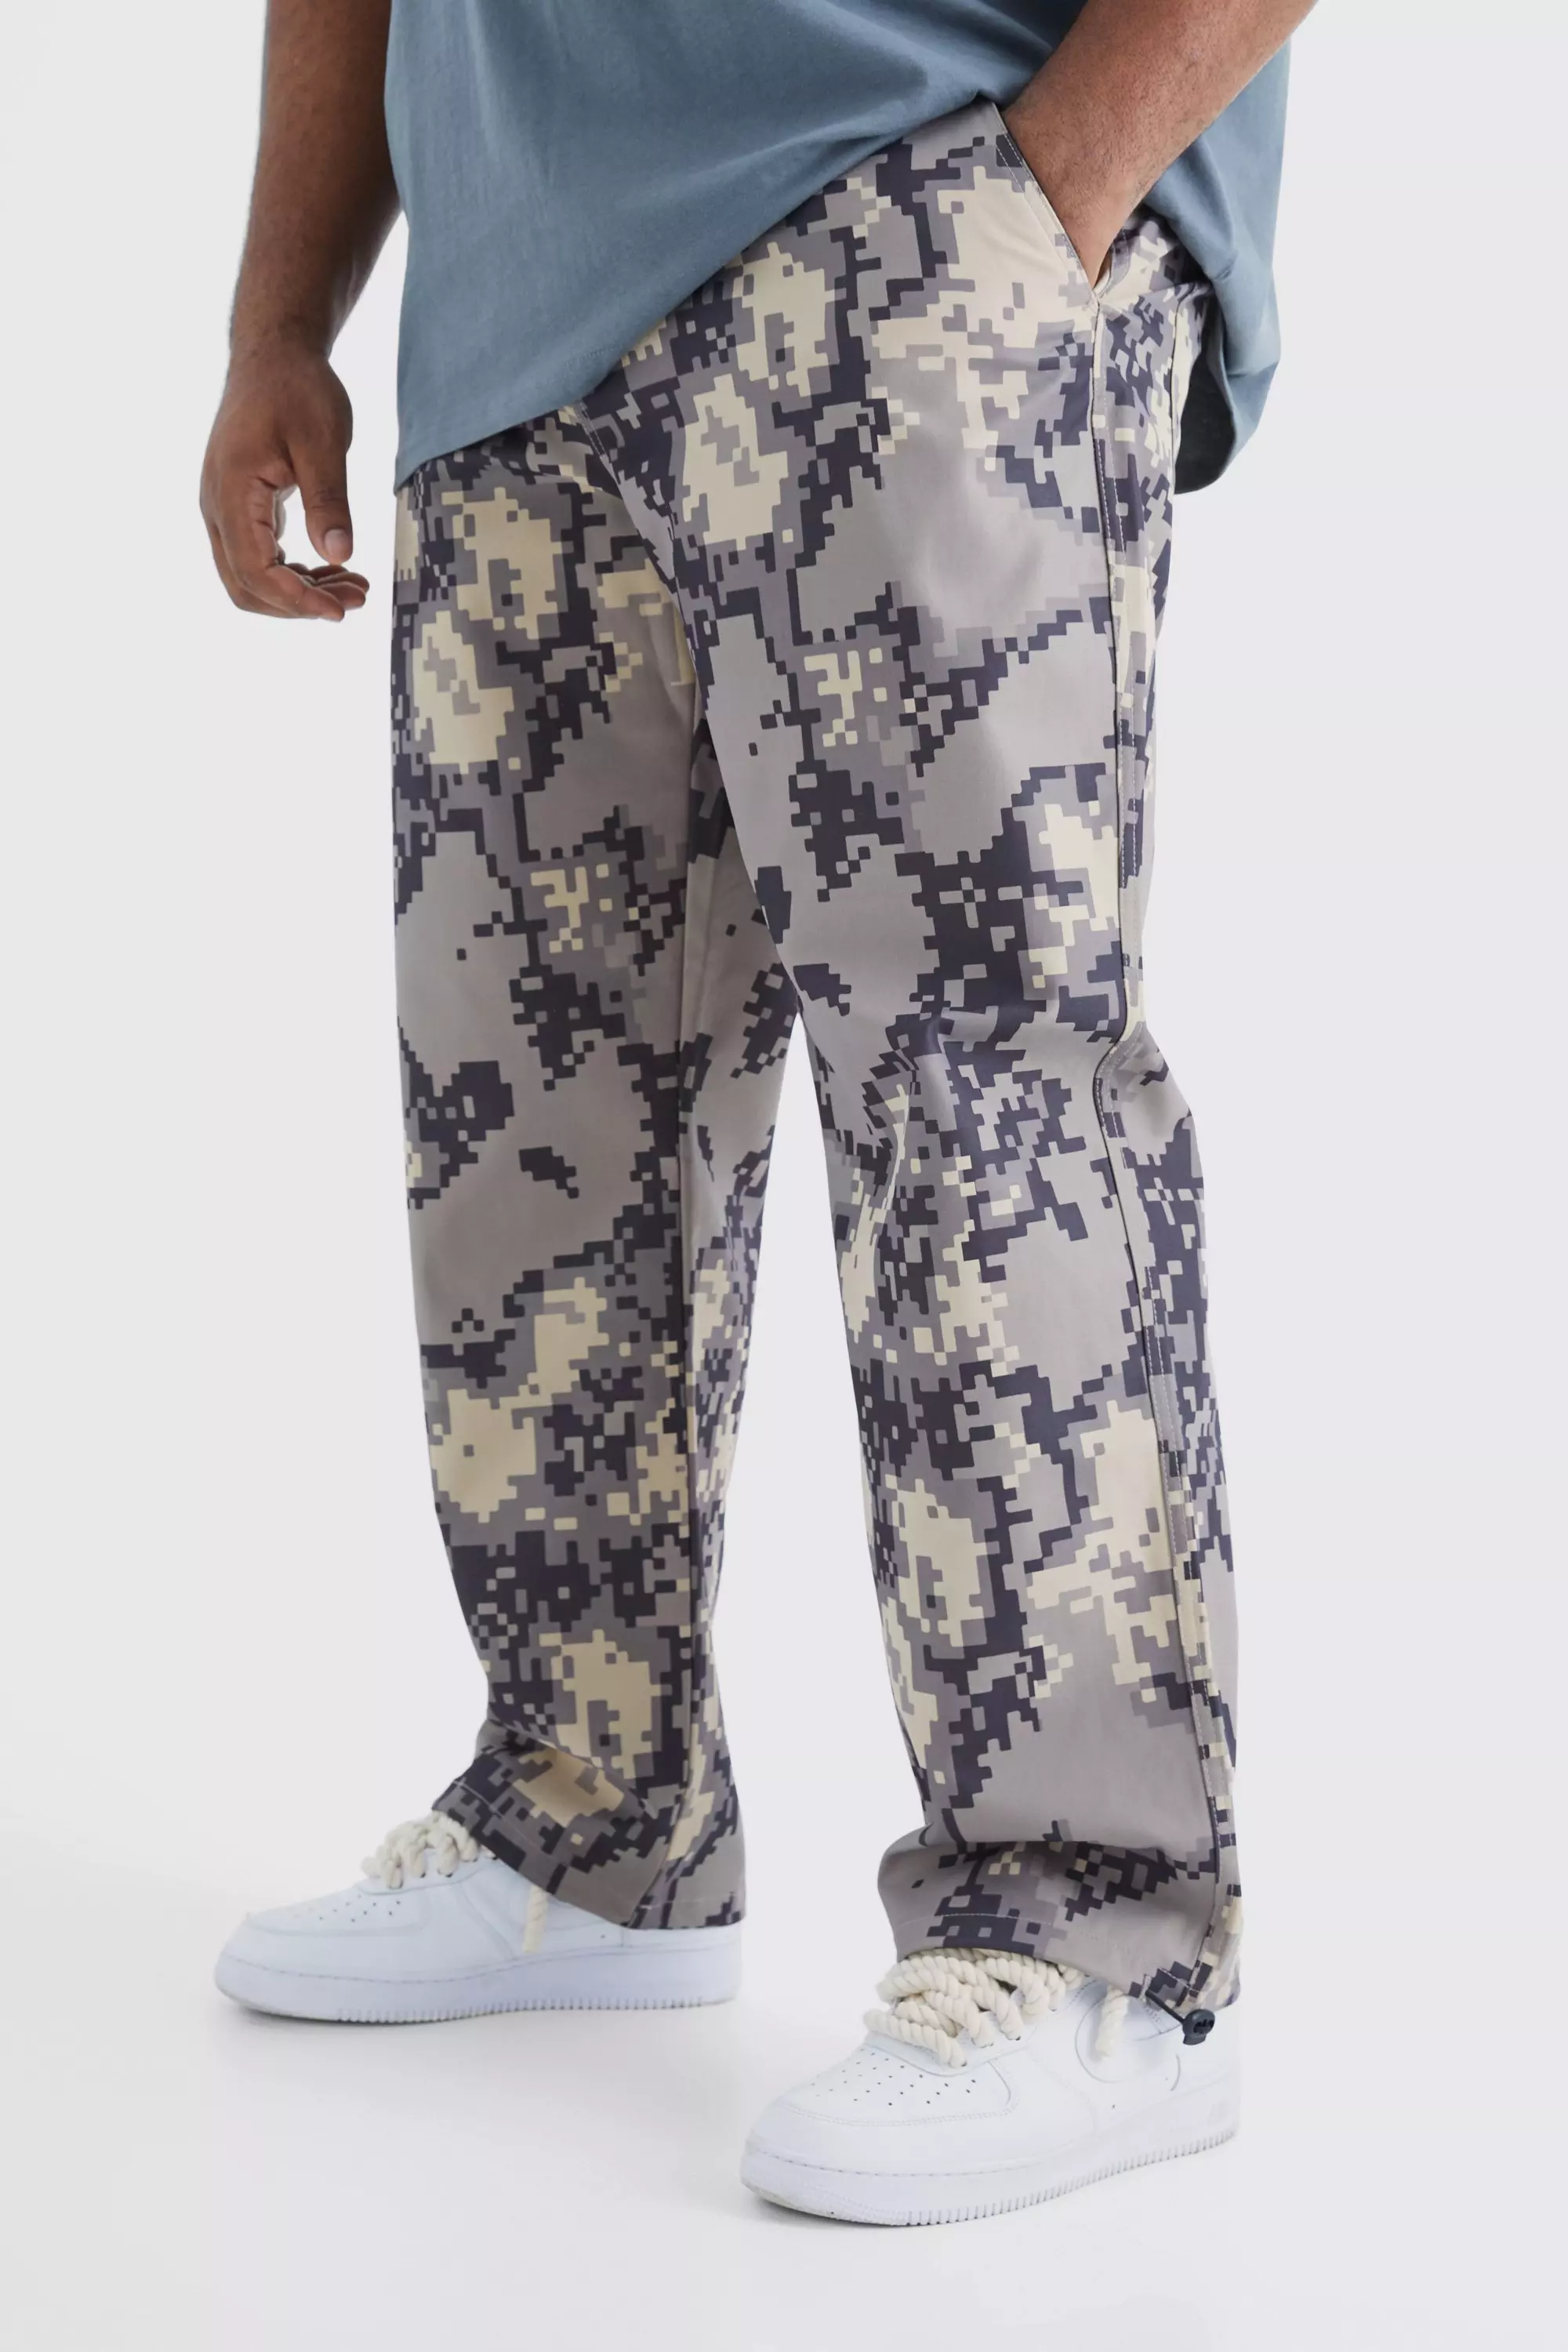 Stone Beige Plus Relaxed Pixelated Camo Pants